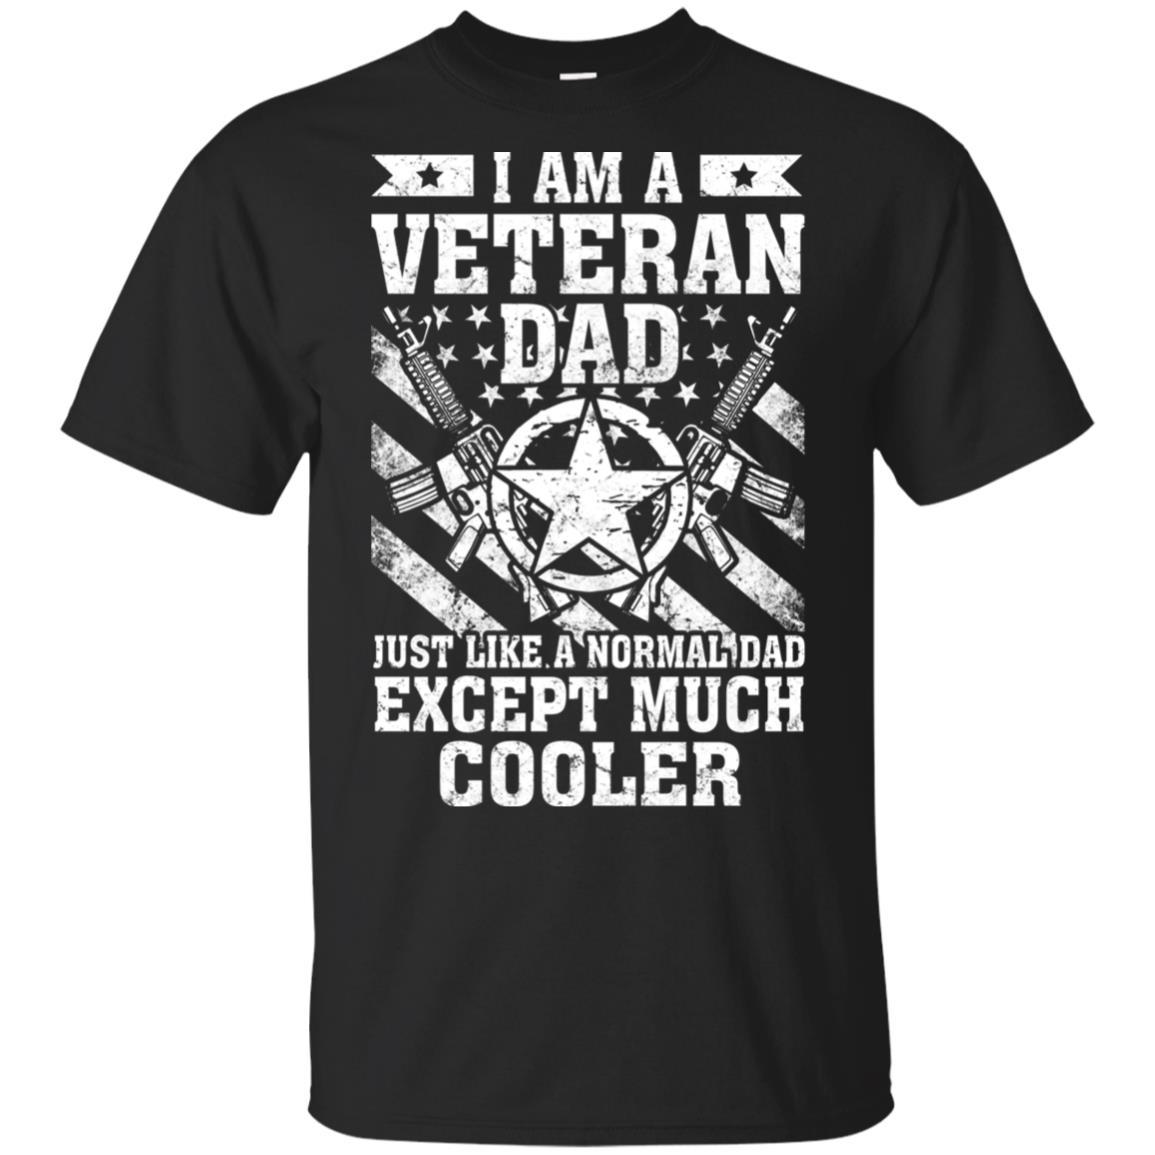 Military T-Shirt "I Am A Veteran Dad Just Like A Normal Dad Except Much Cooler On" Front-TShirt-General-Veterans Nation